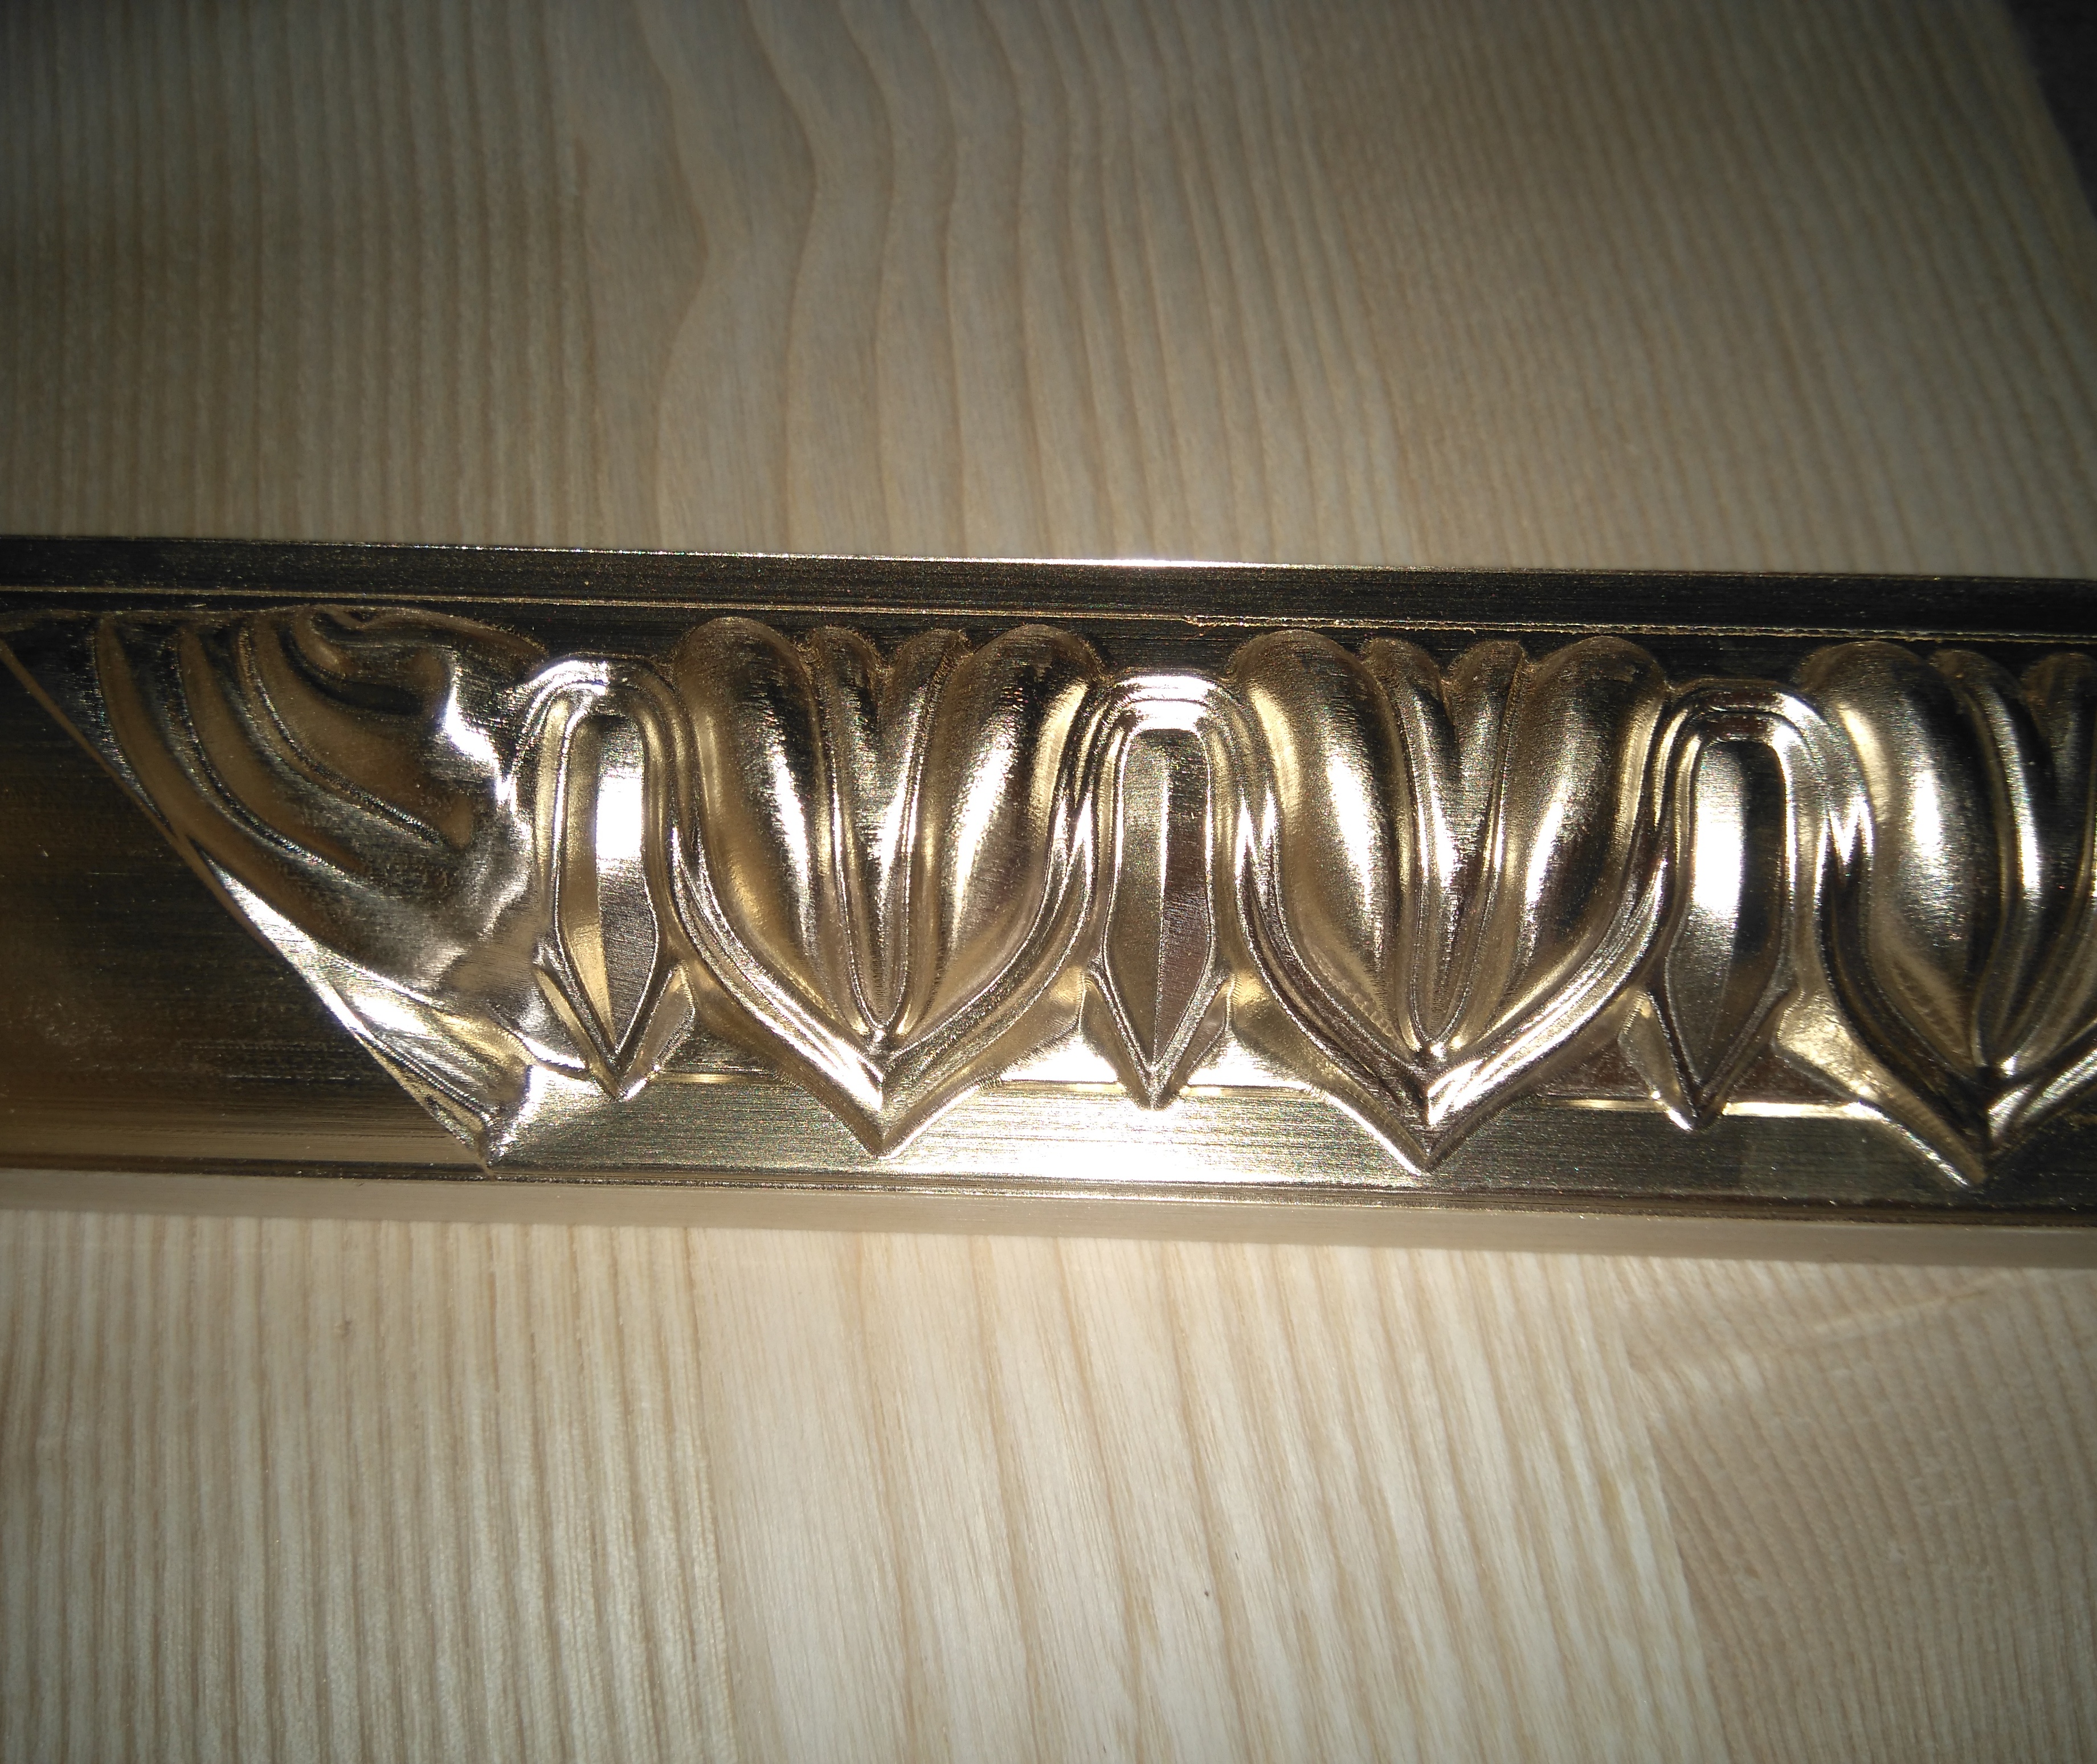 A brass moulding for yacht design.